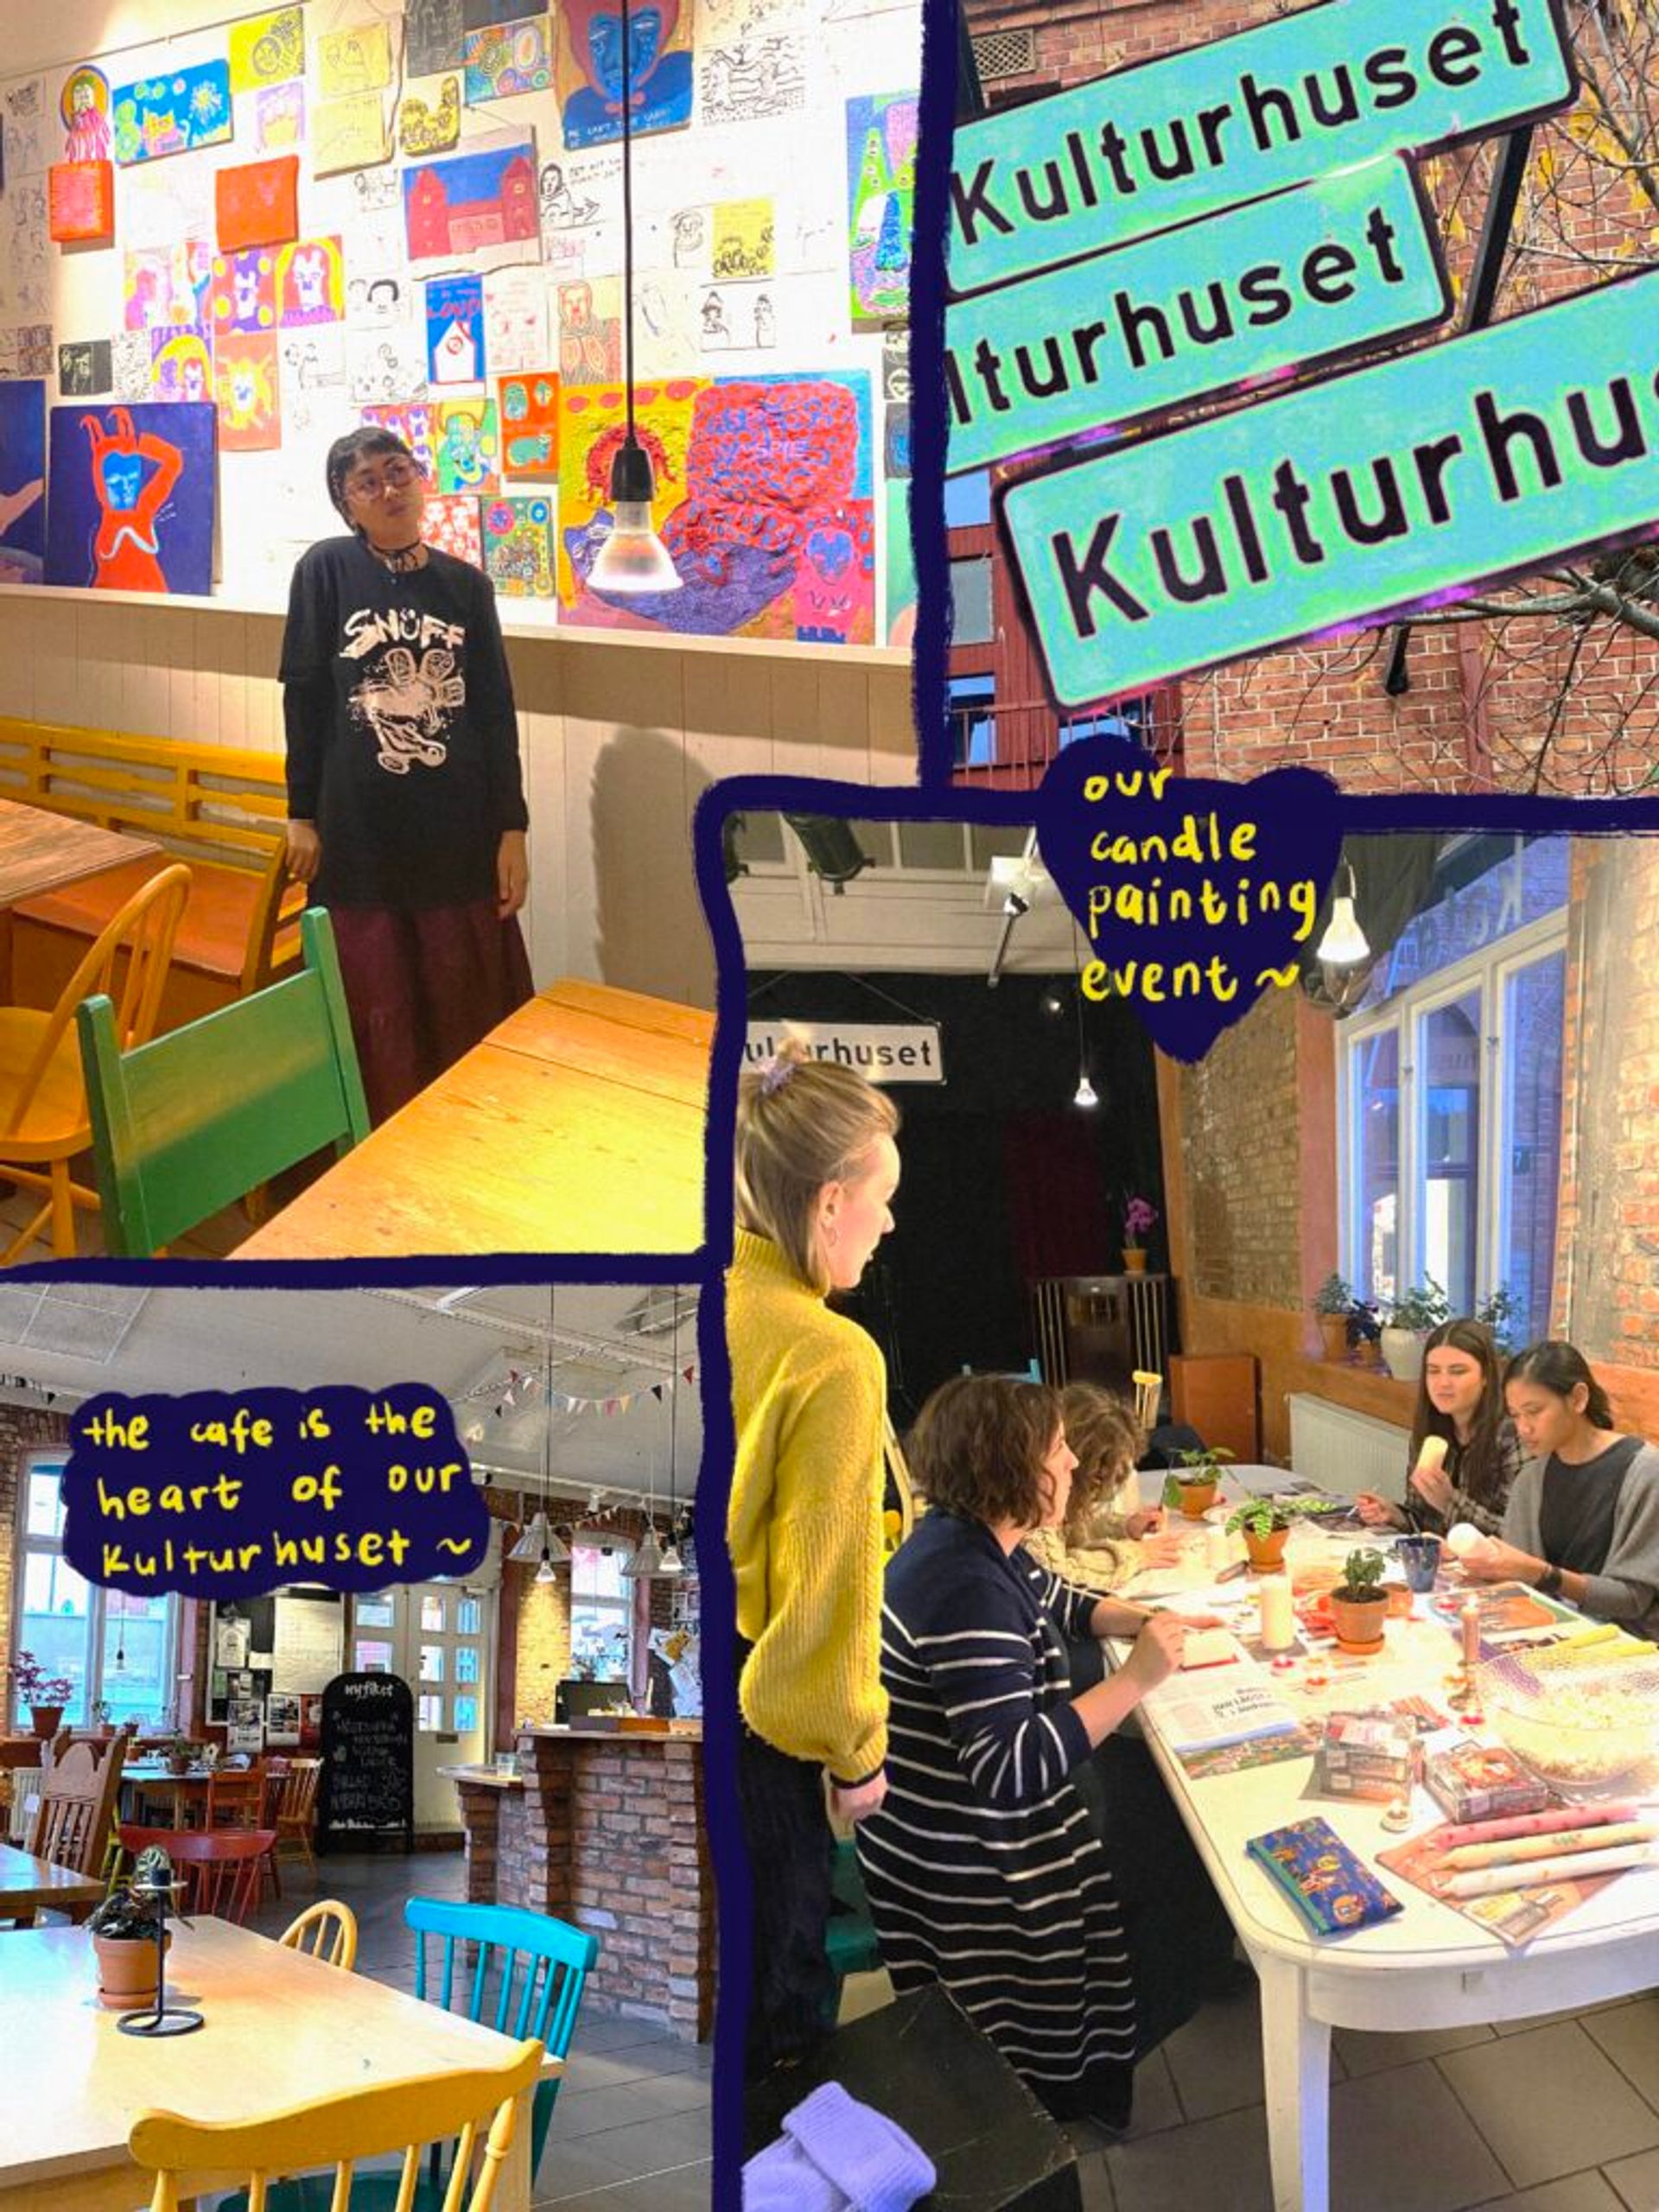 Activities and events, both art and cultural in Kulturhuset Jönköping for international students